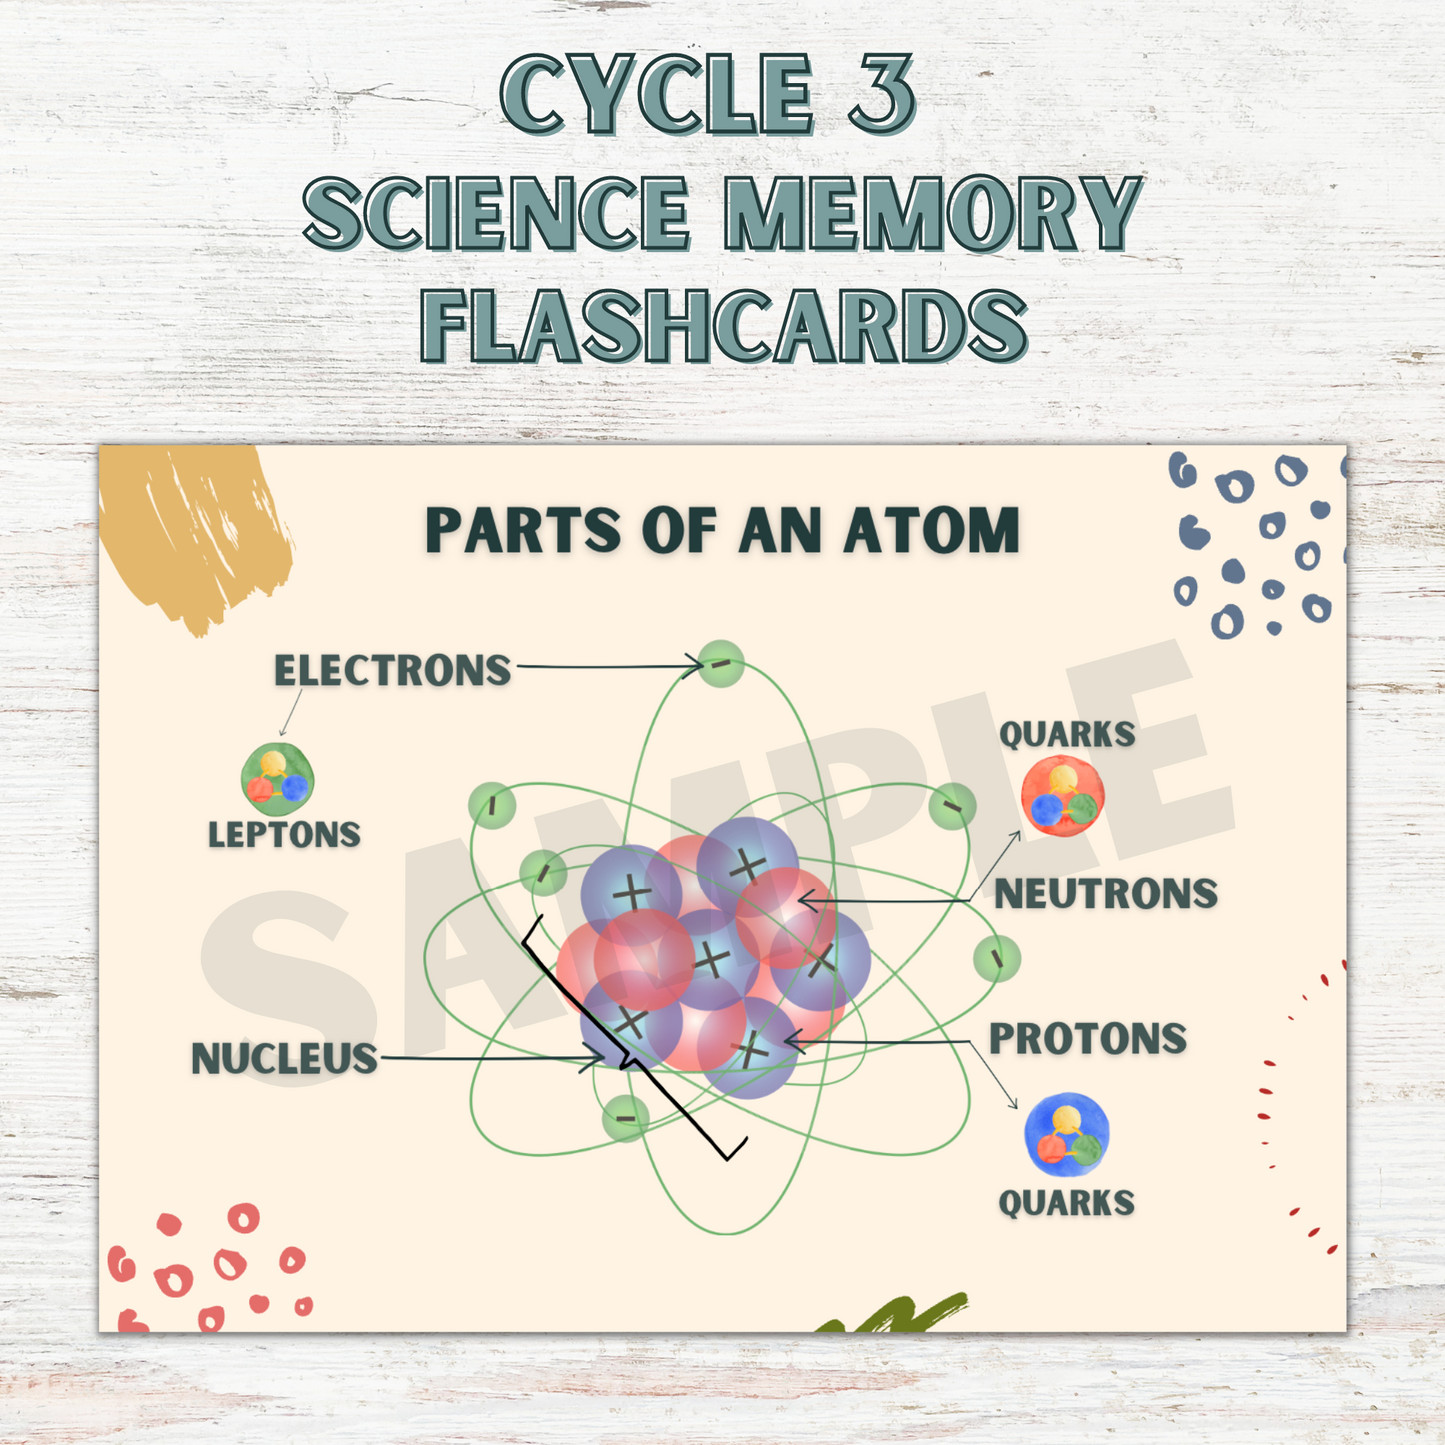 Science Memory Cards | CC Cycle 3